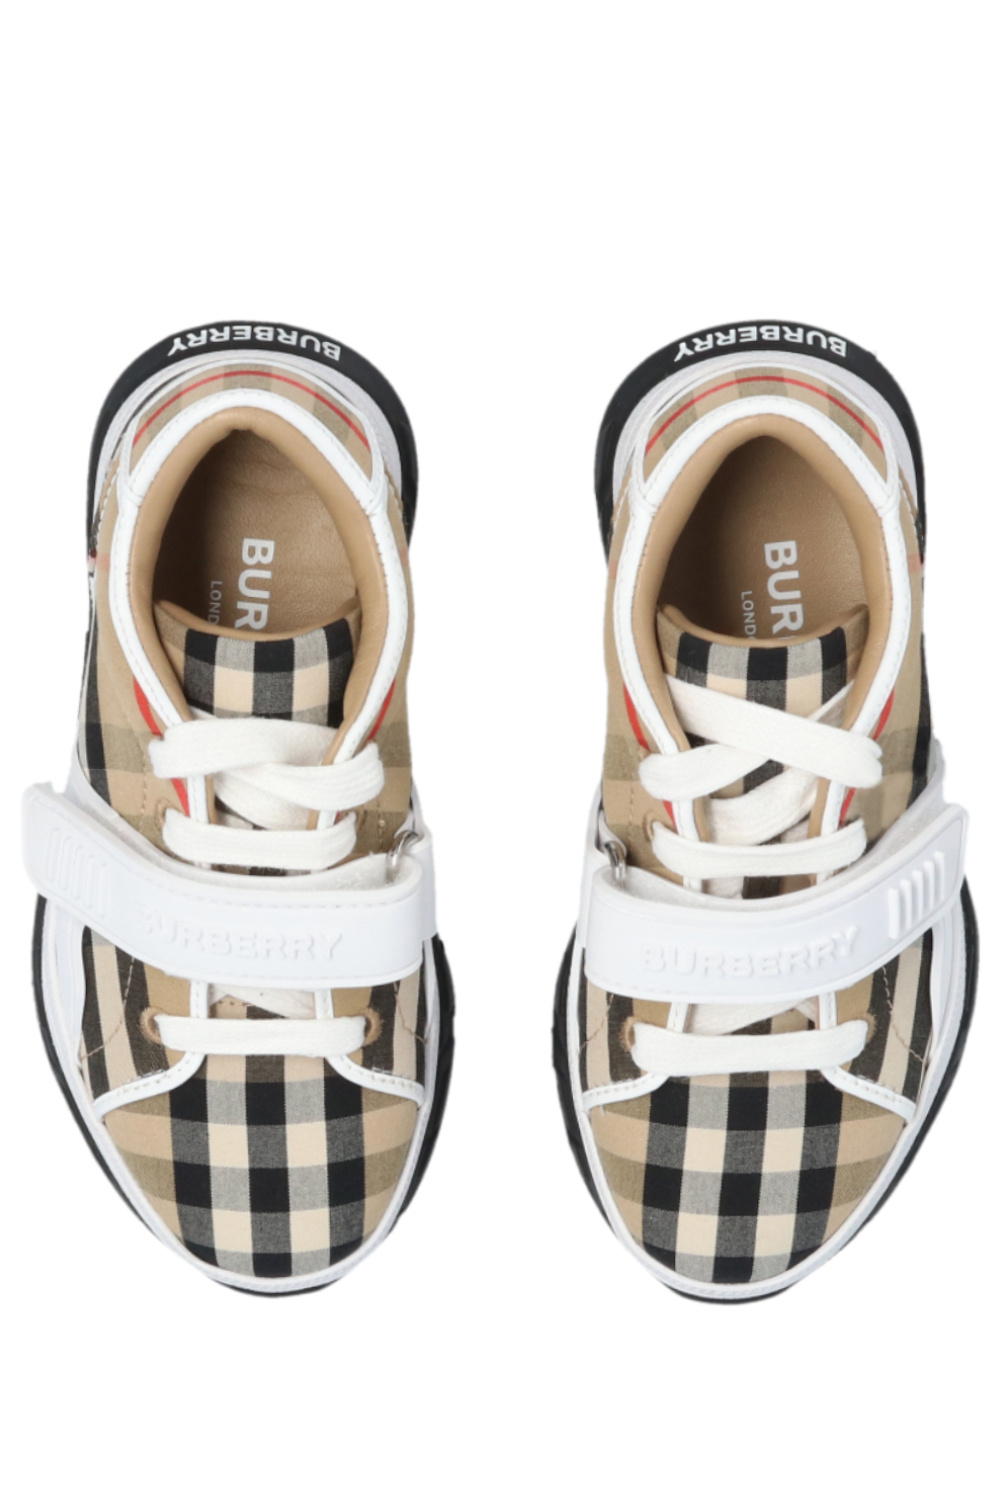 Burberry Kids Sports shoes Caramelo with a plaid pattern